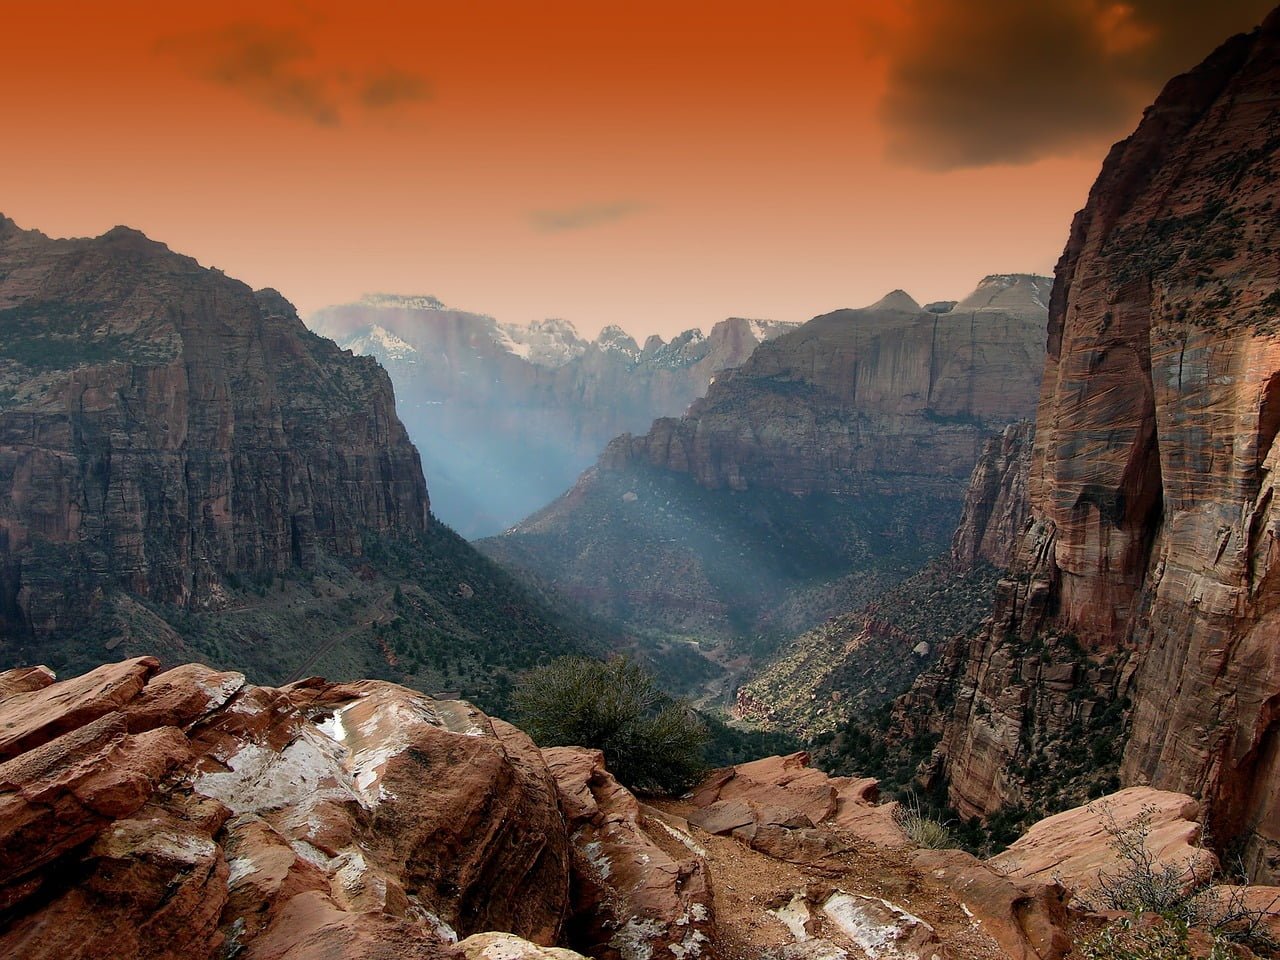 A breathtaking view of a deep canyon with layered rock formations under an orange-tinted sky, featuring sparse vegetation and patches of snow in the foreground.